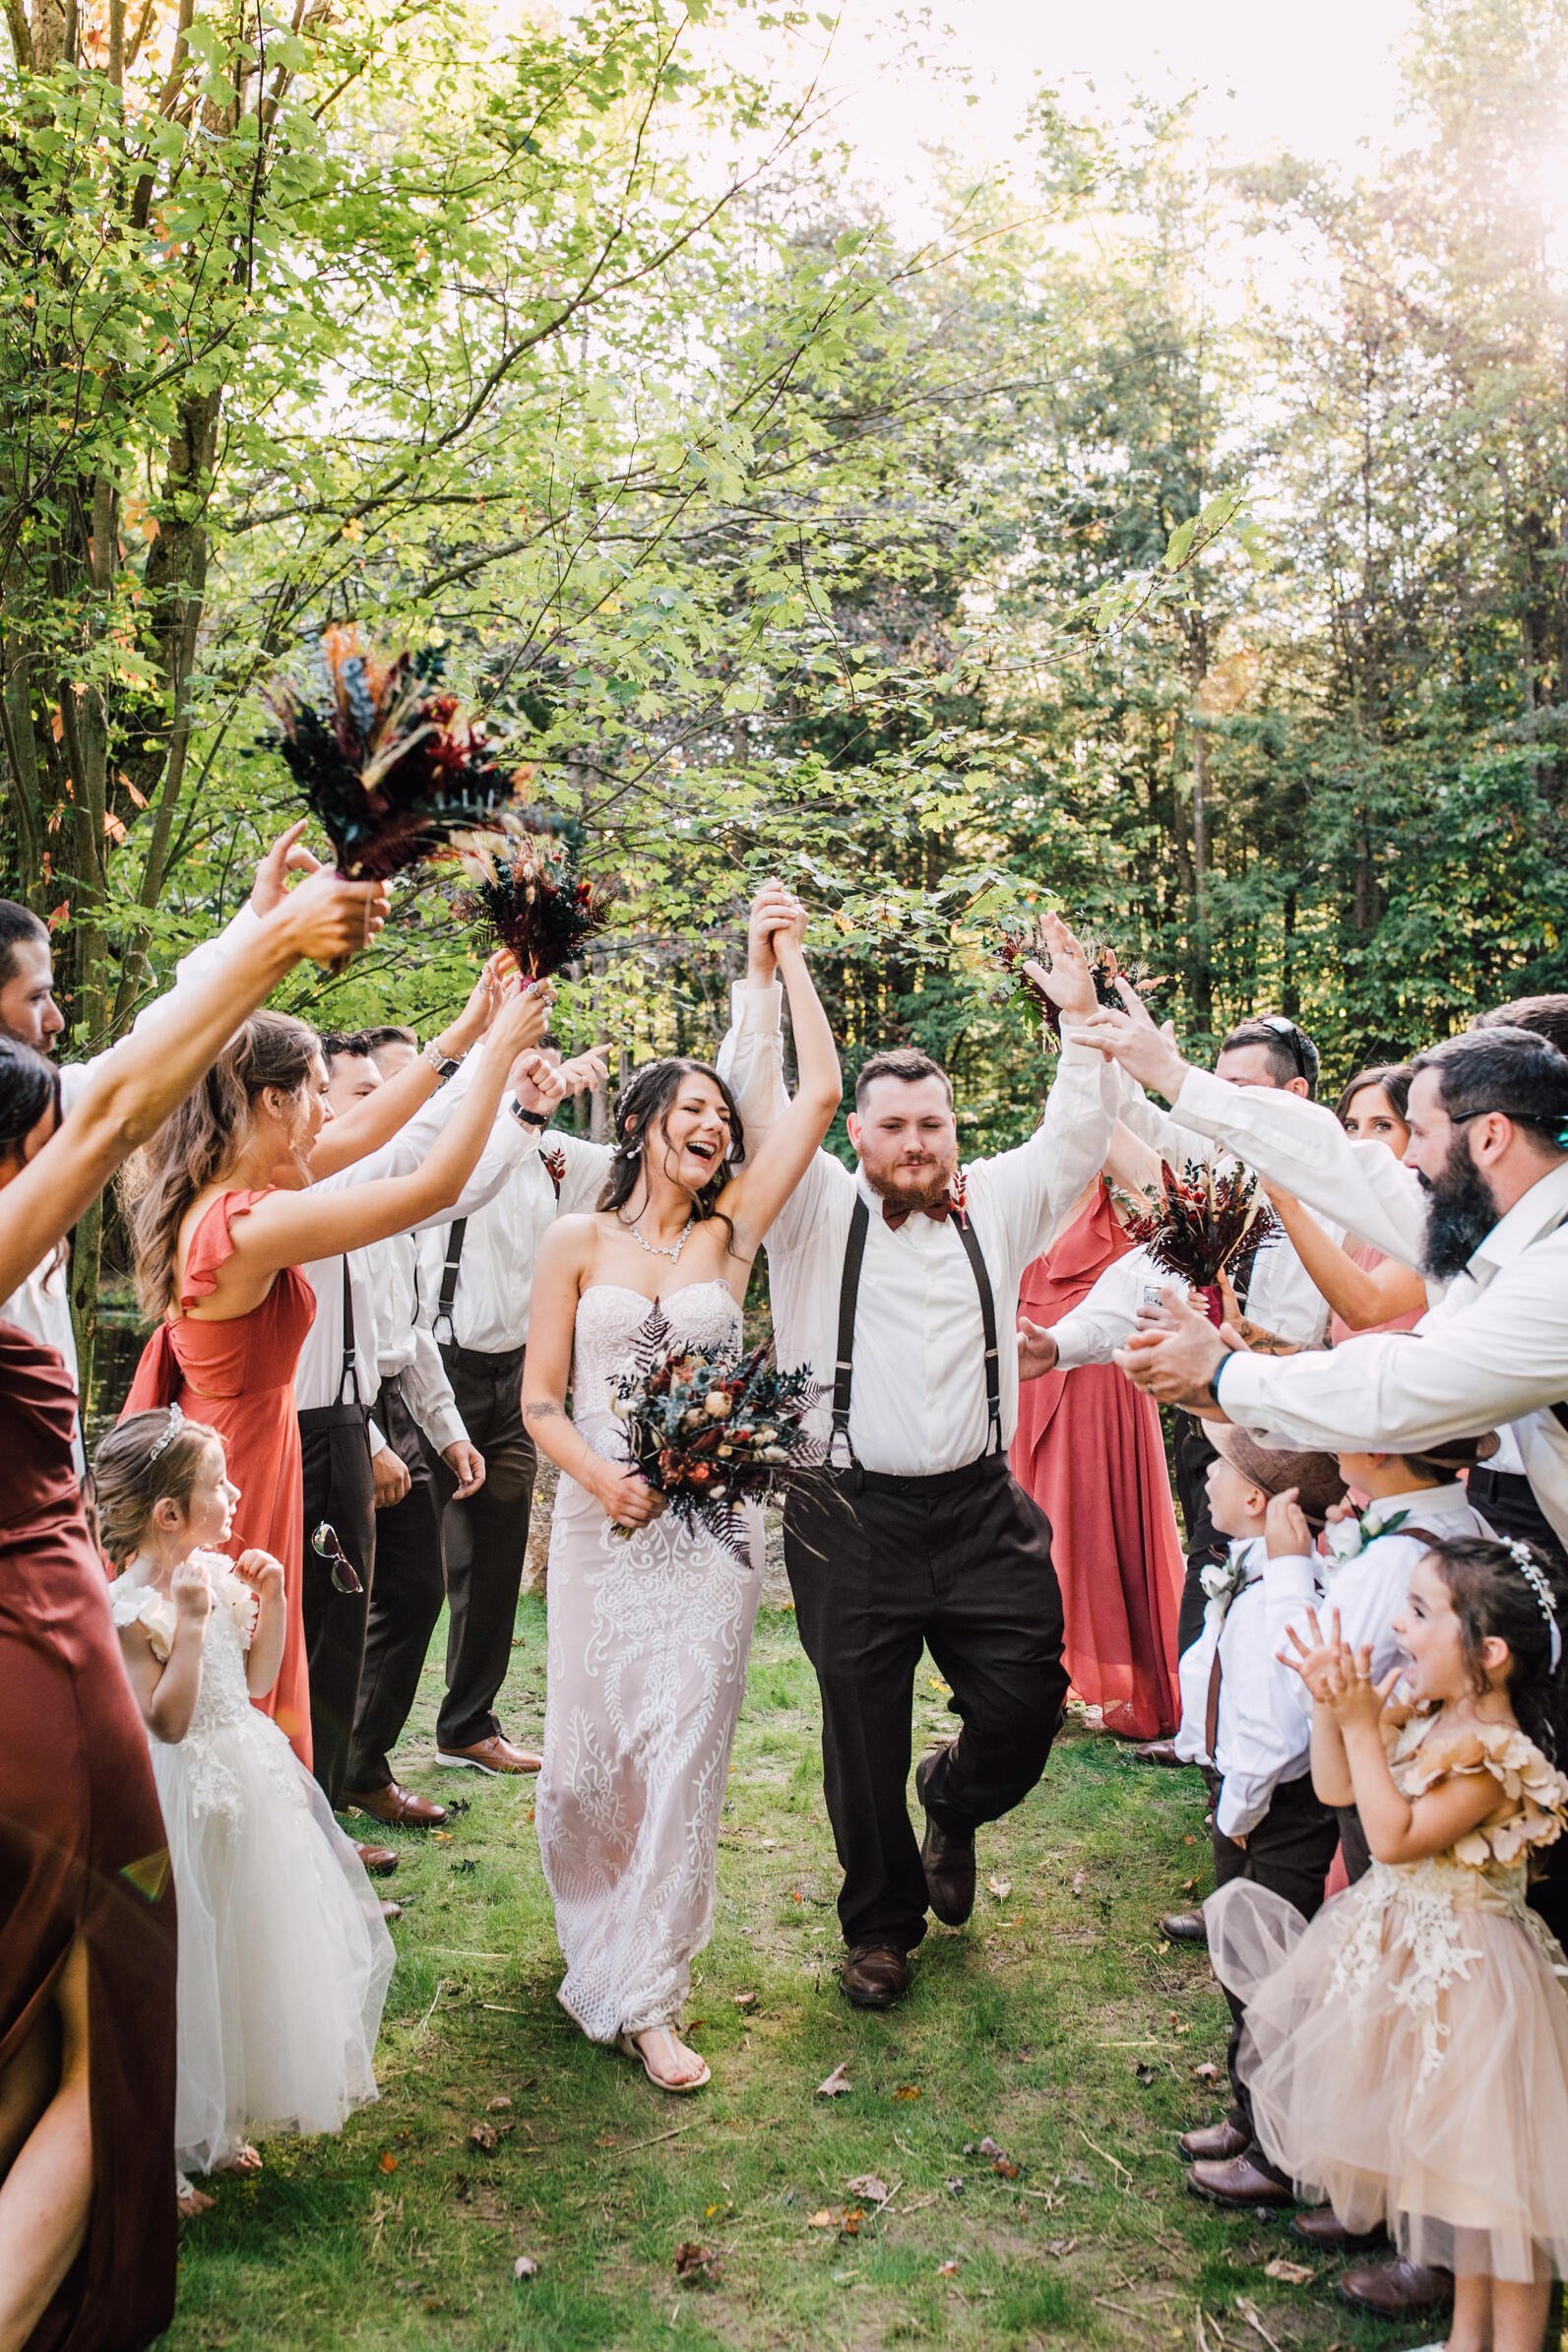  The bride and groom throw their arms in the air as they are surrounded my their wedding party cheering for them after their outdoor fall wedding 